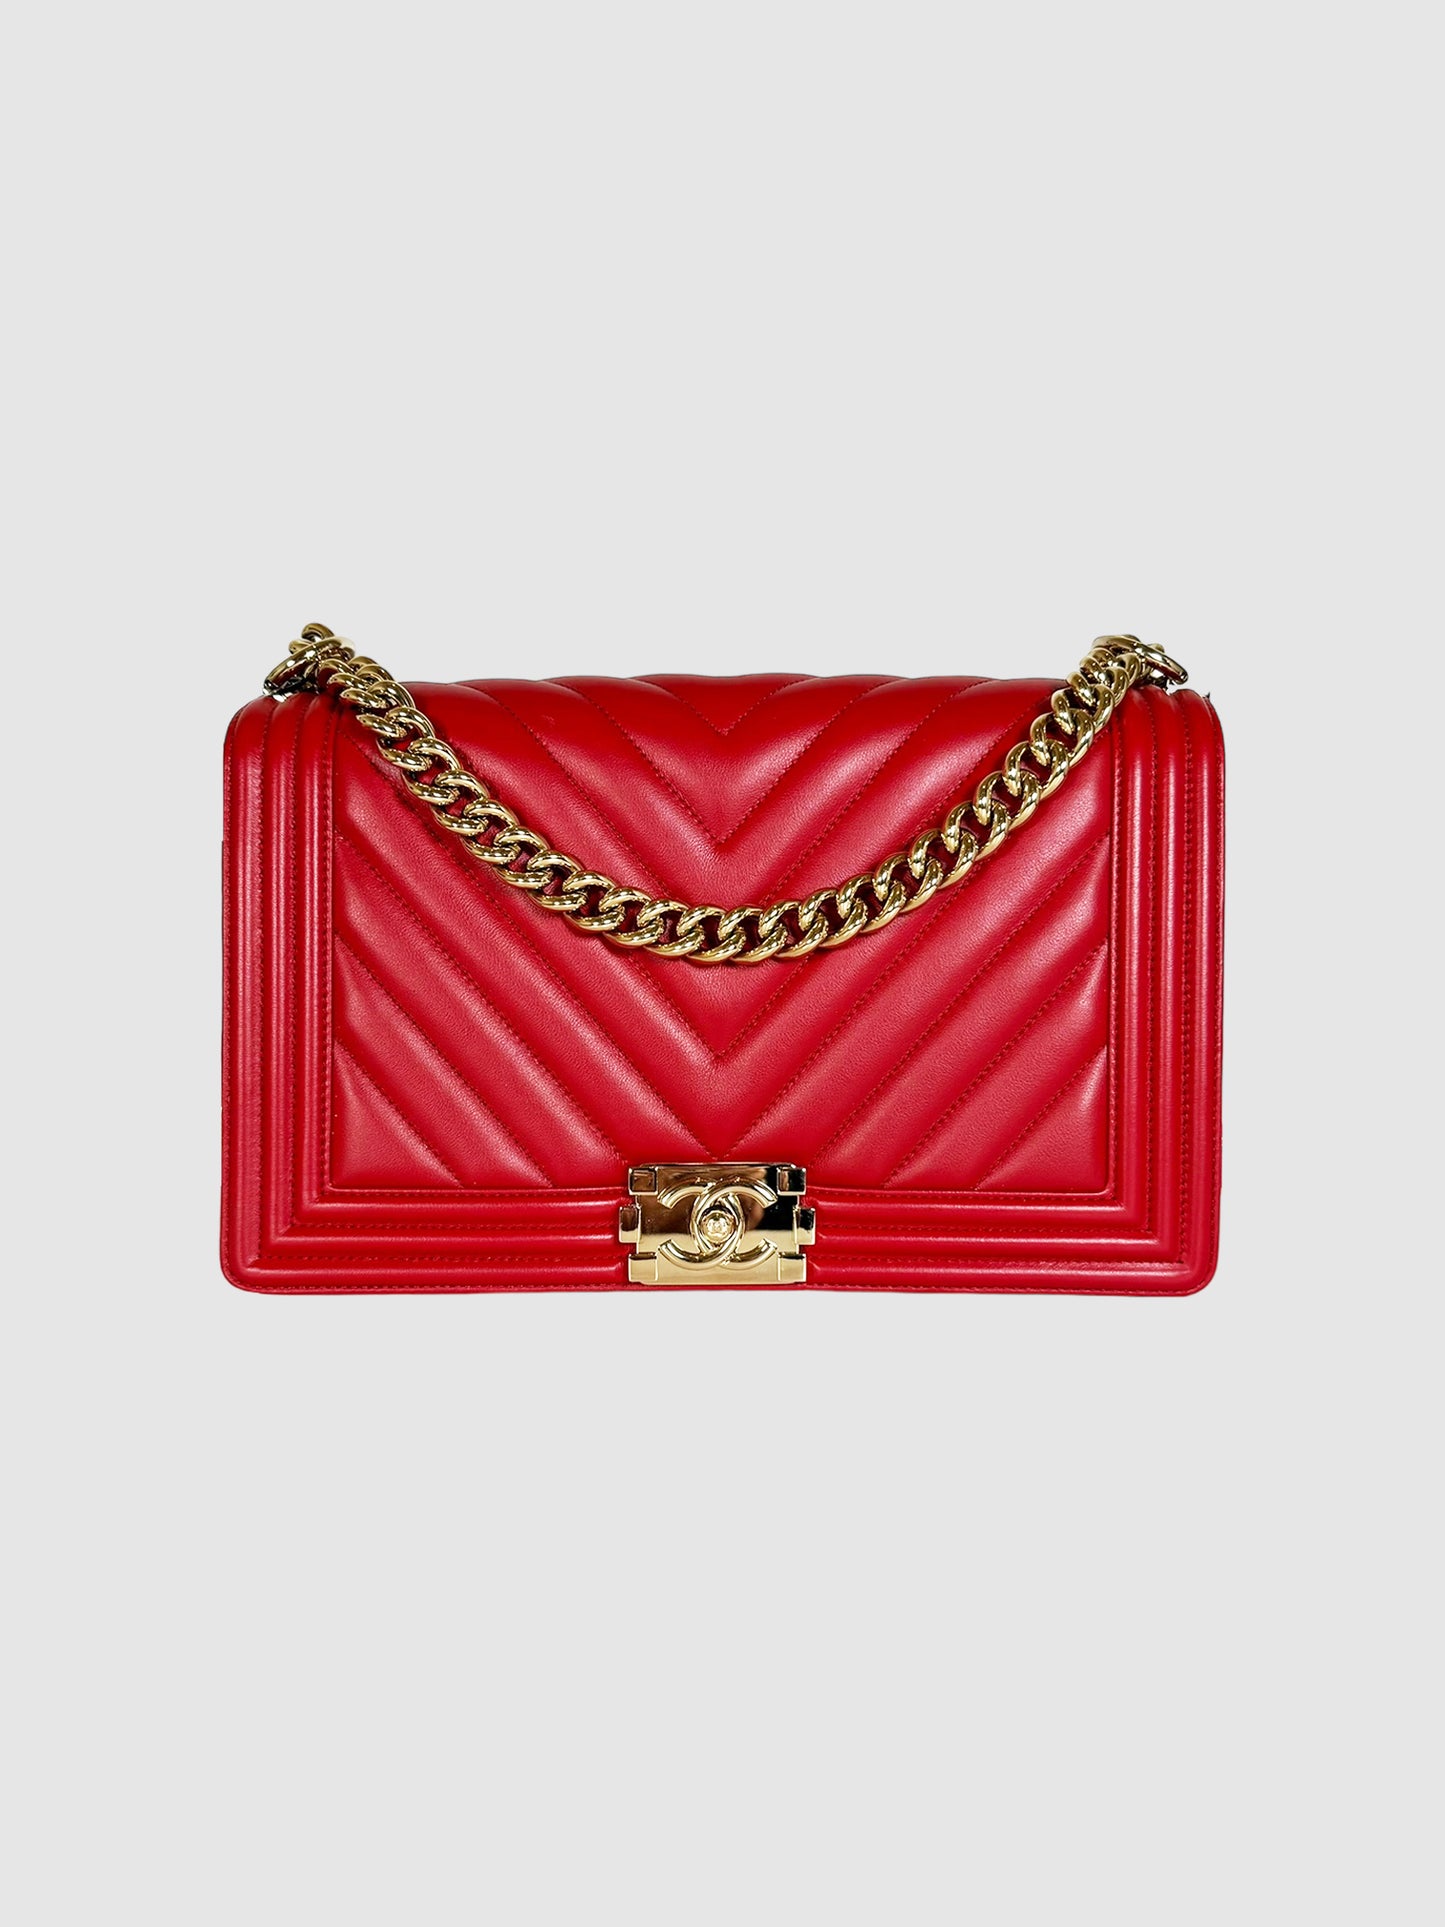 Chanel Chevron Medium Quilted Boy Bag in Red Leather Trendy Valentine Consignor Secondhand